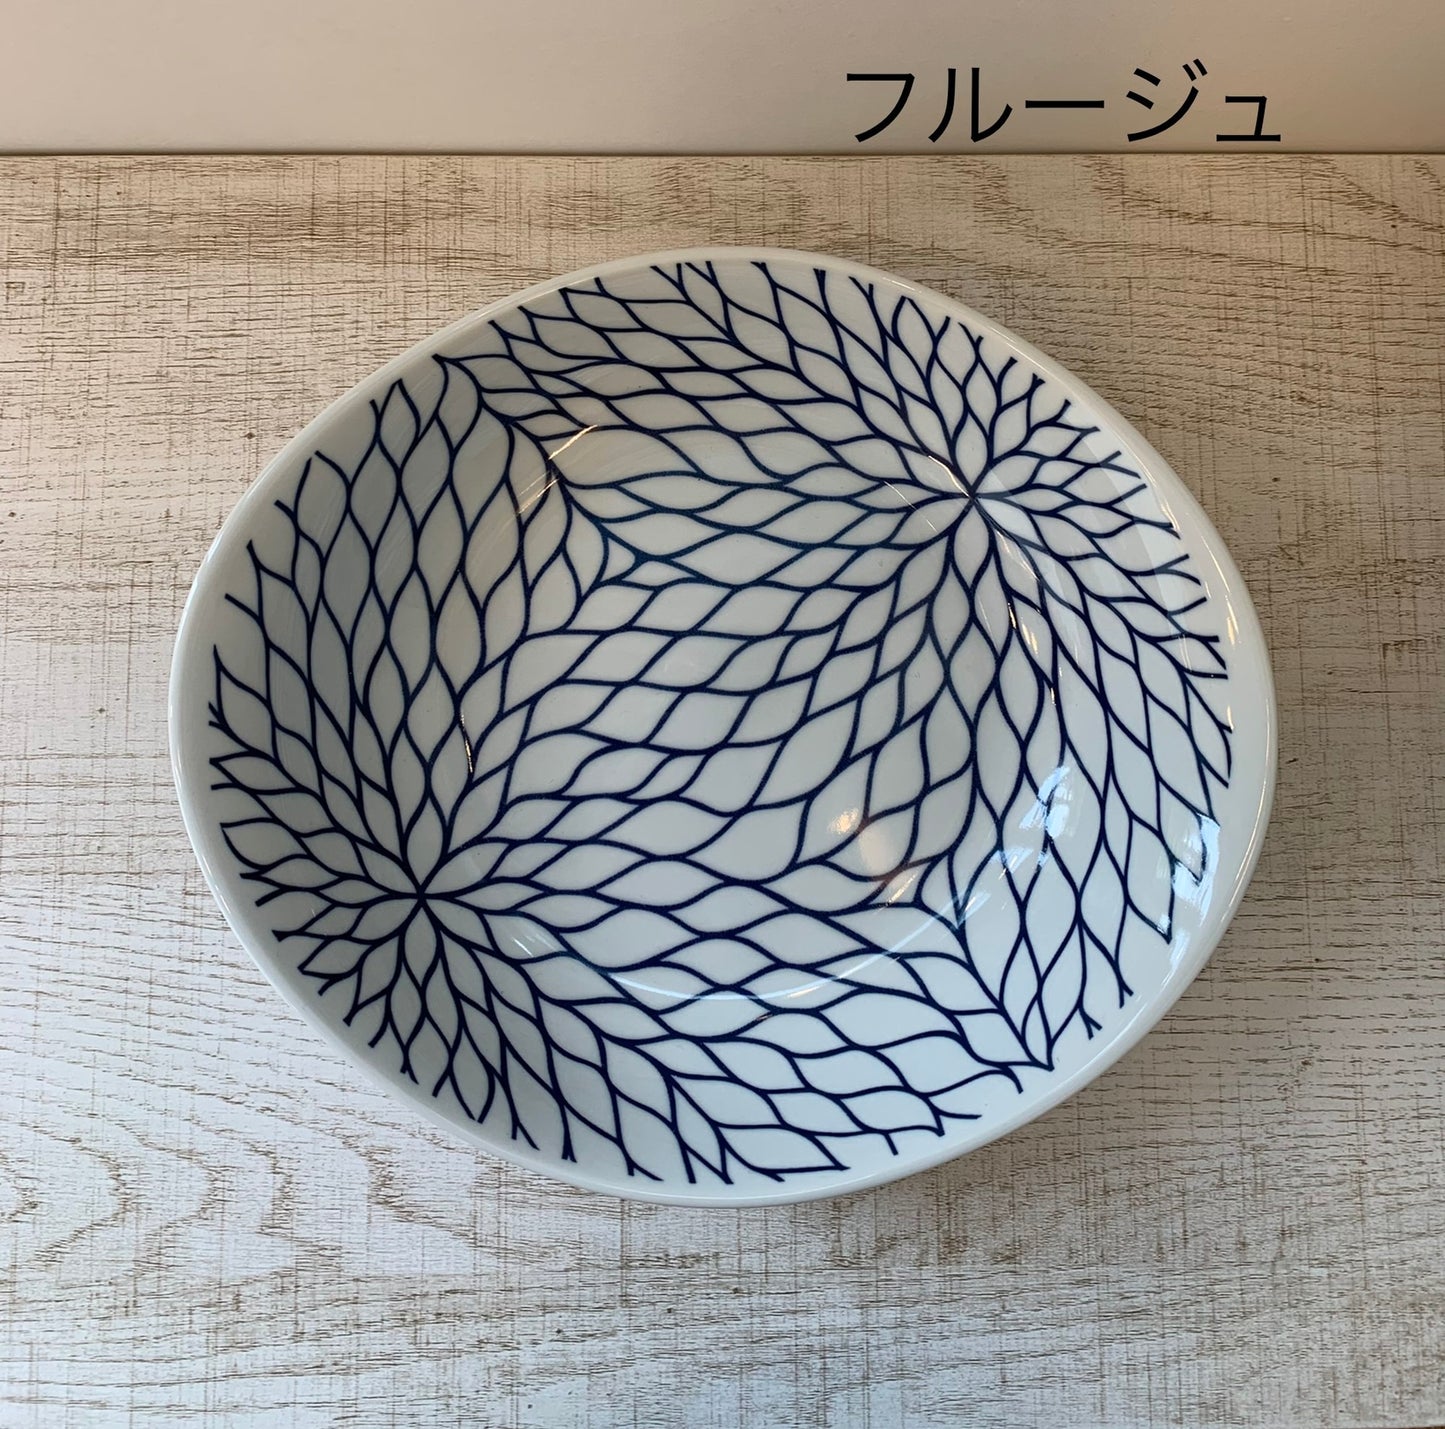 [natural69] [Curry pasta plate] [Hasami ware] Curry plate Salad bowl